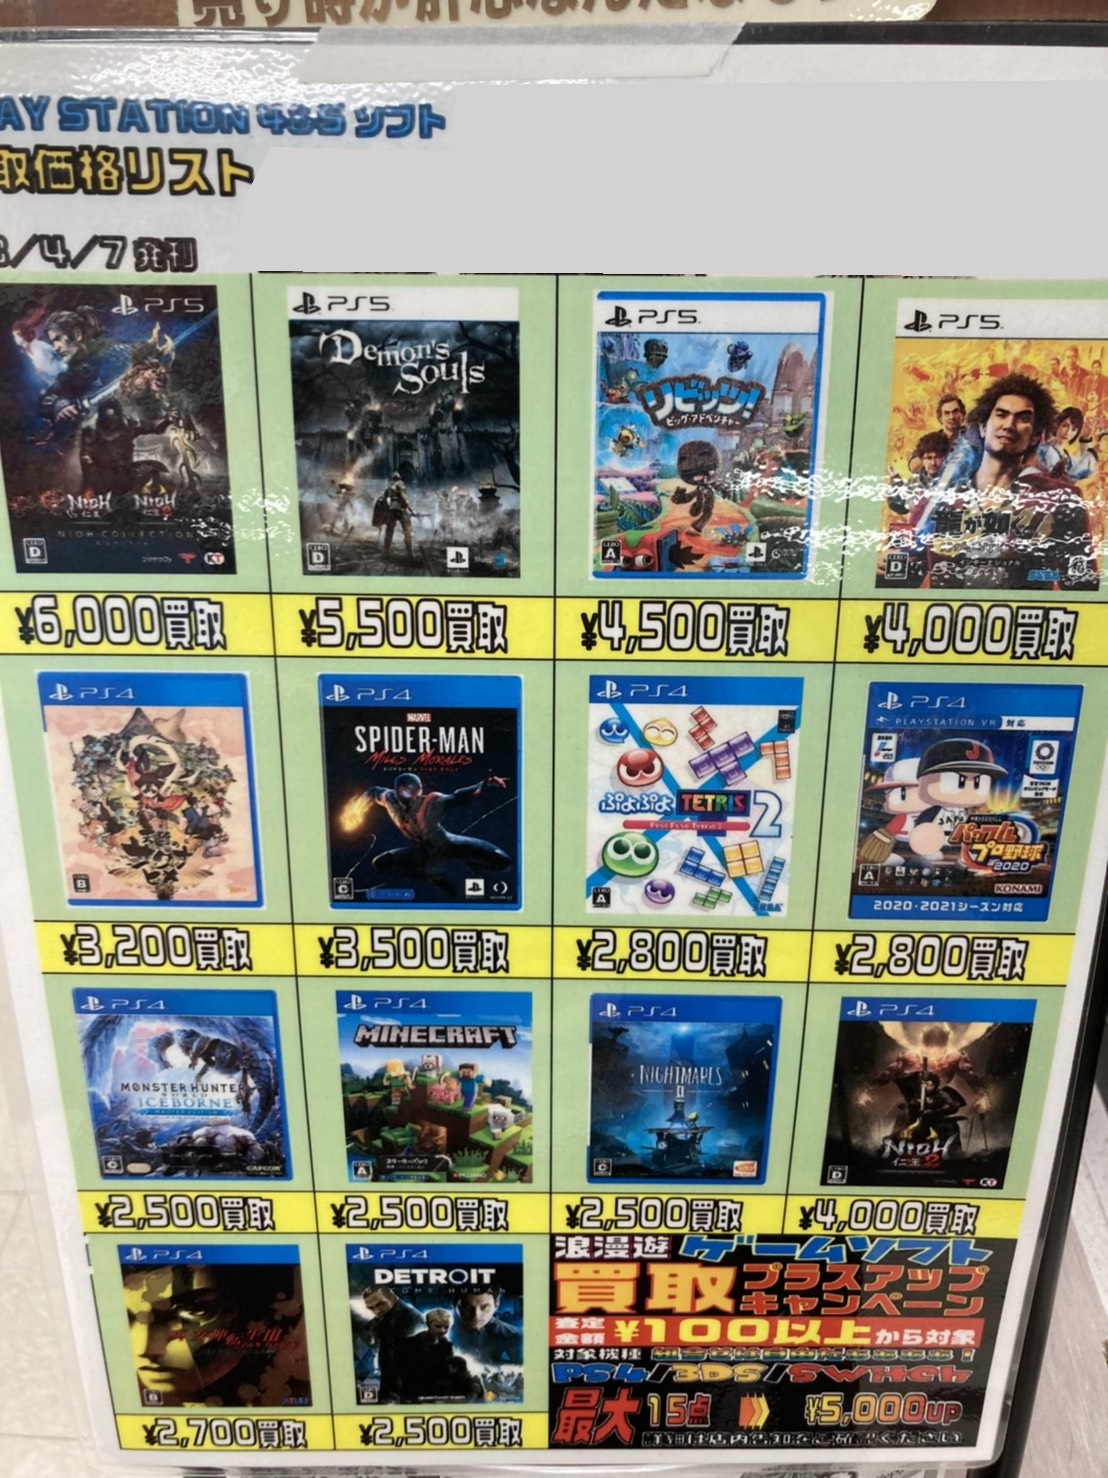 4/8 【PS4・PS5ソフト】買取価格リスト更新しました！ – 浪漫遊 福井店